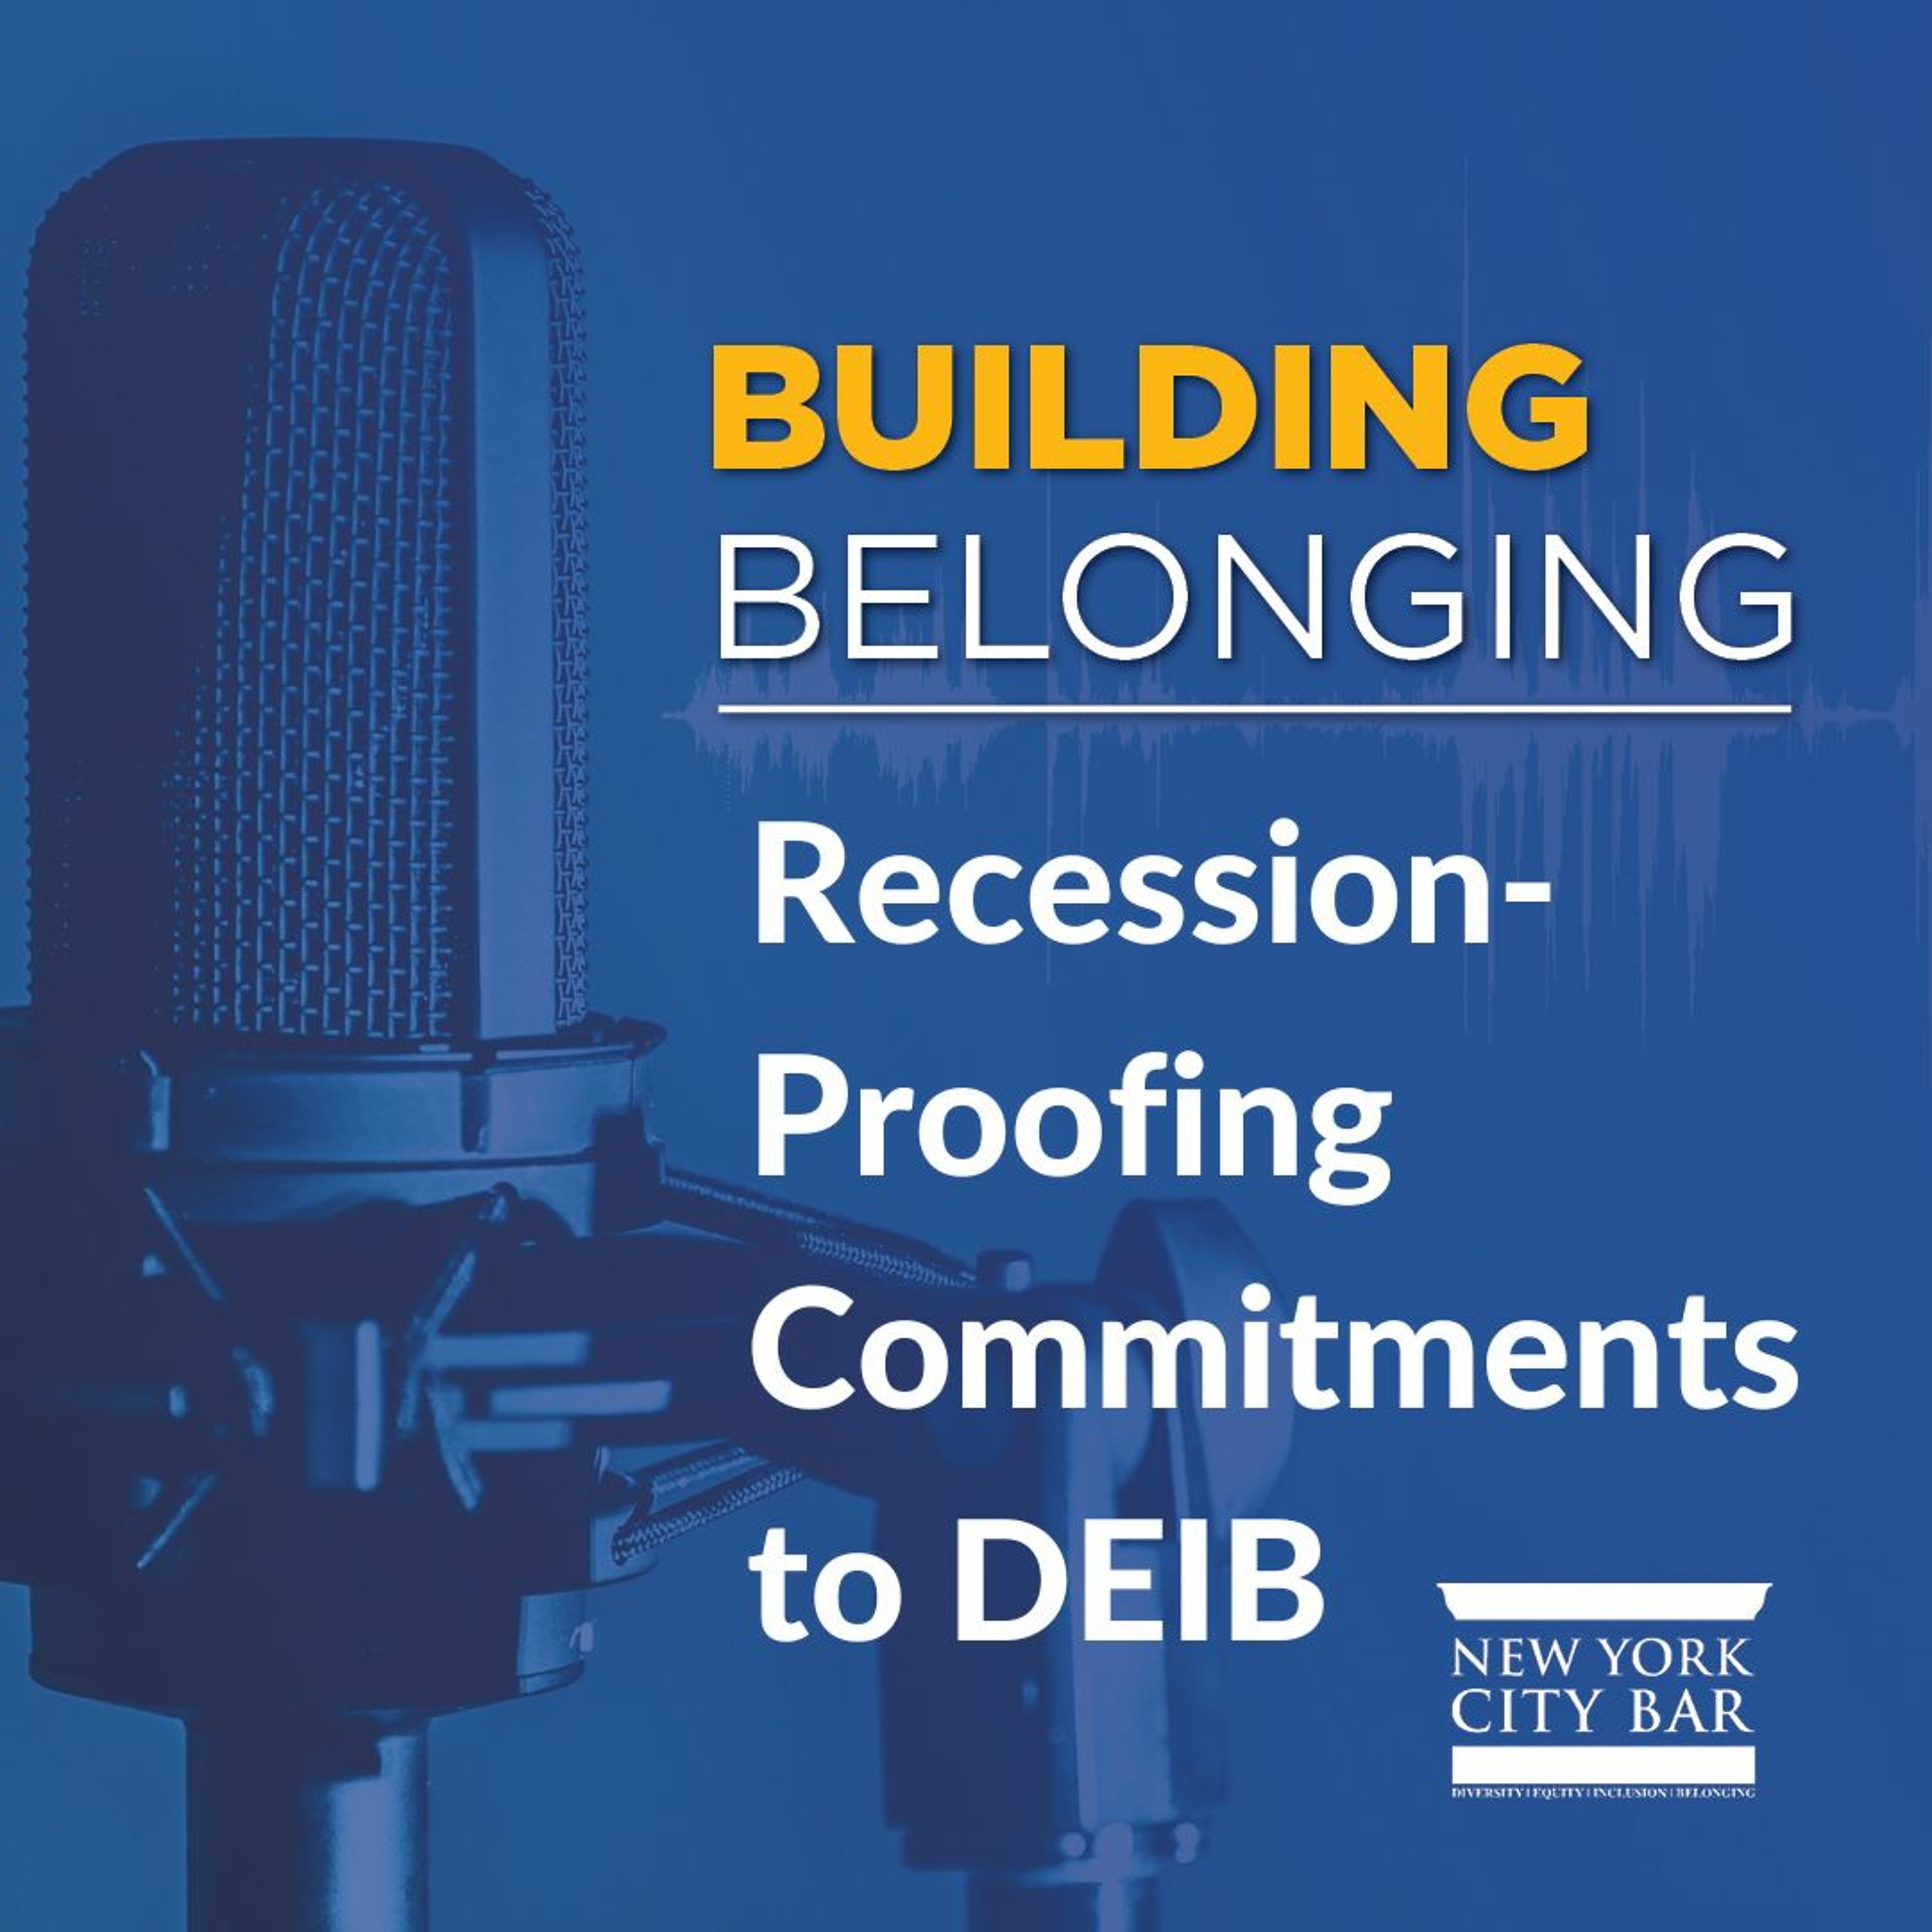 Building Belonging: Recession-Proofing Commitments to DEIB